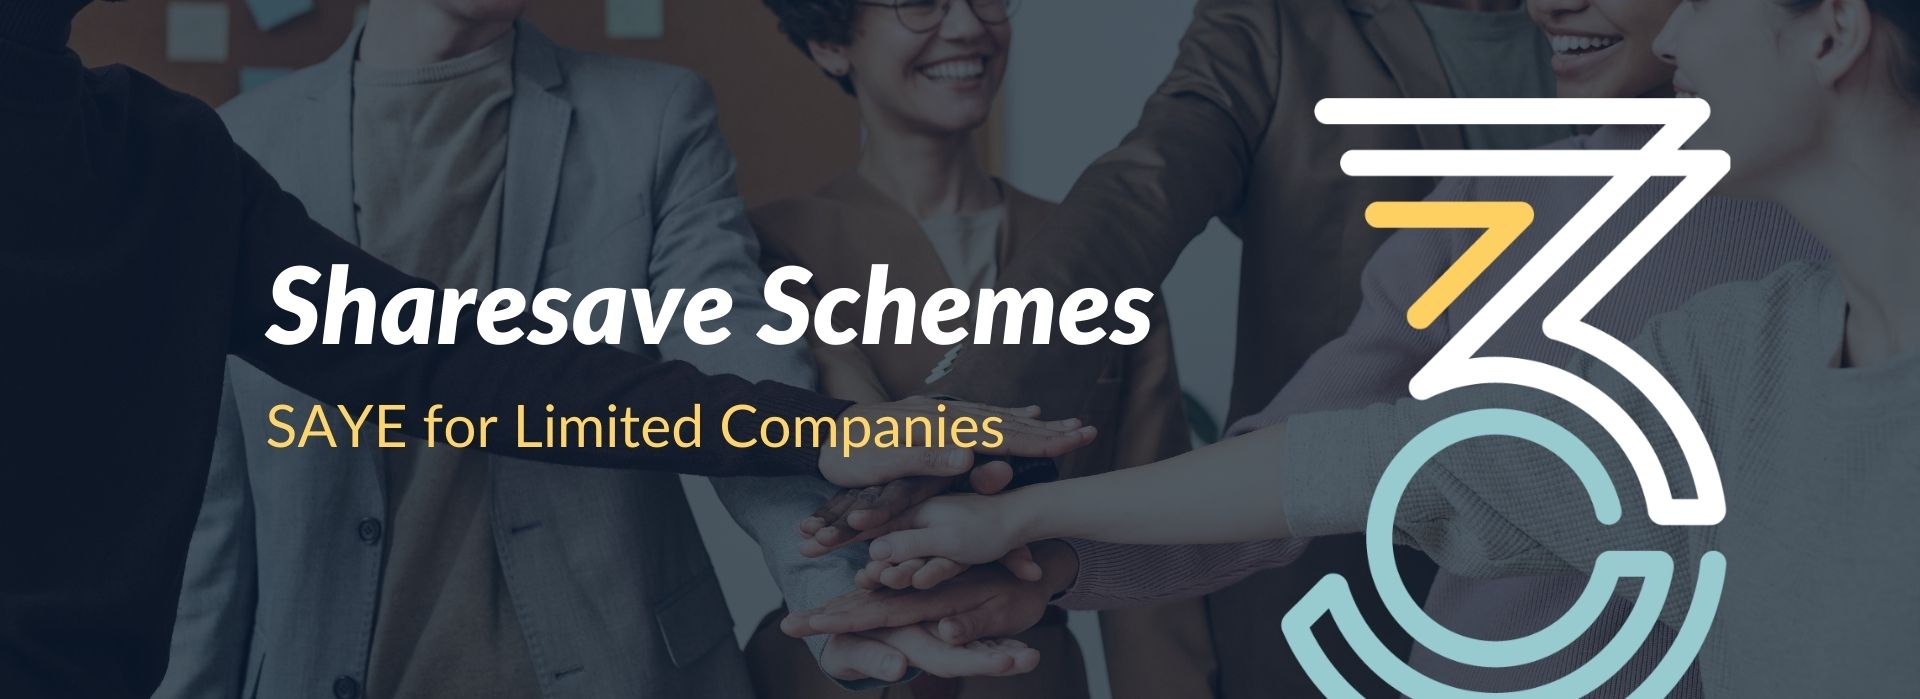 SHARESAVE SCHEMES - SAYE FOR LIMITED COMPANIES